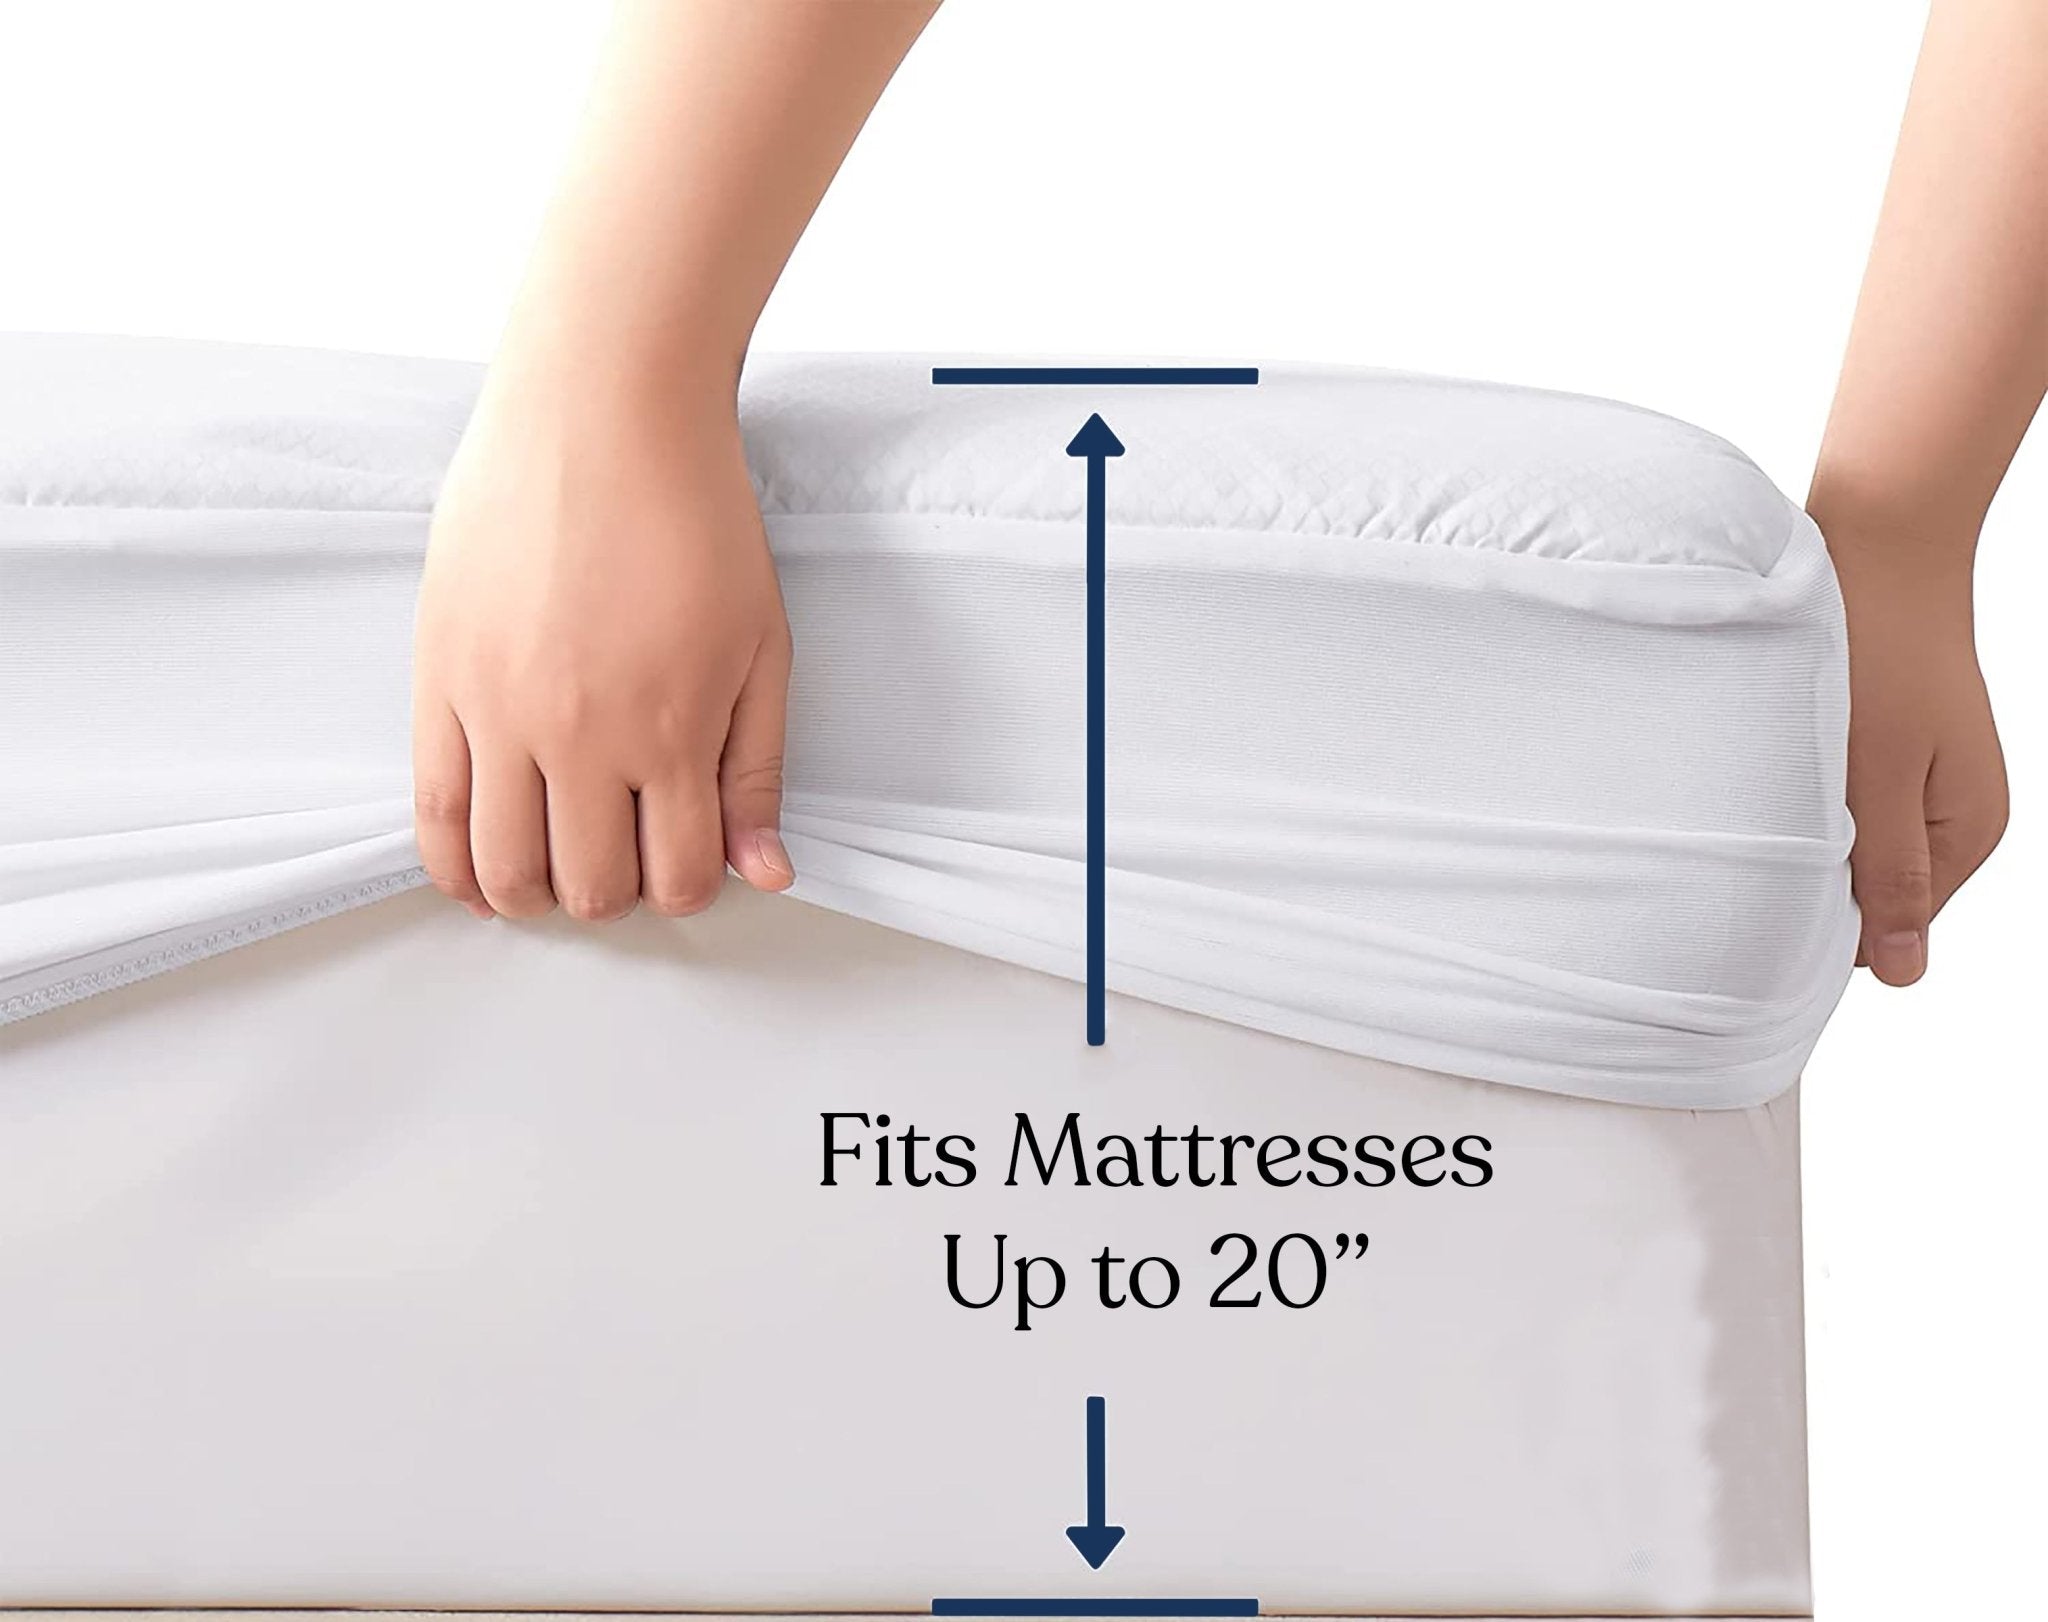 Dreambest Hypoallergenic Cotton Mattress Protector, Full Size - Plow & Hearth